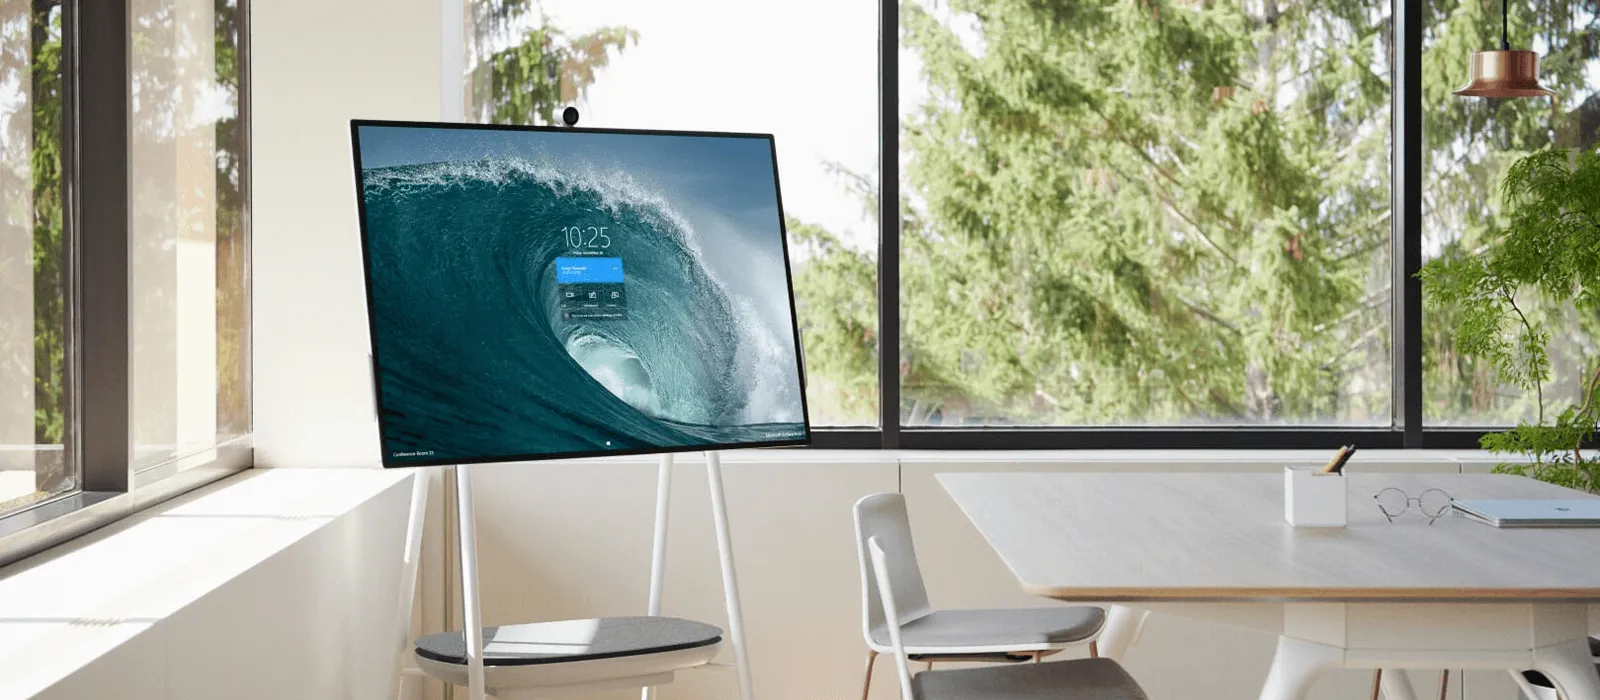 The Surface Hub 2 is standing in the corner of an office space